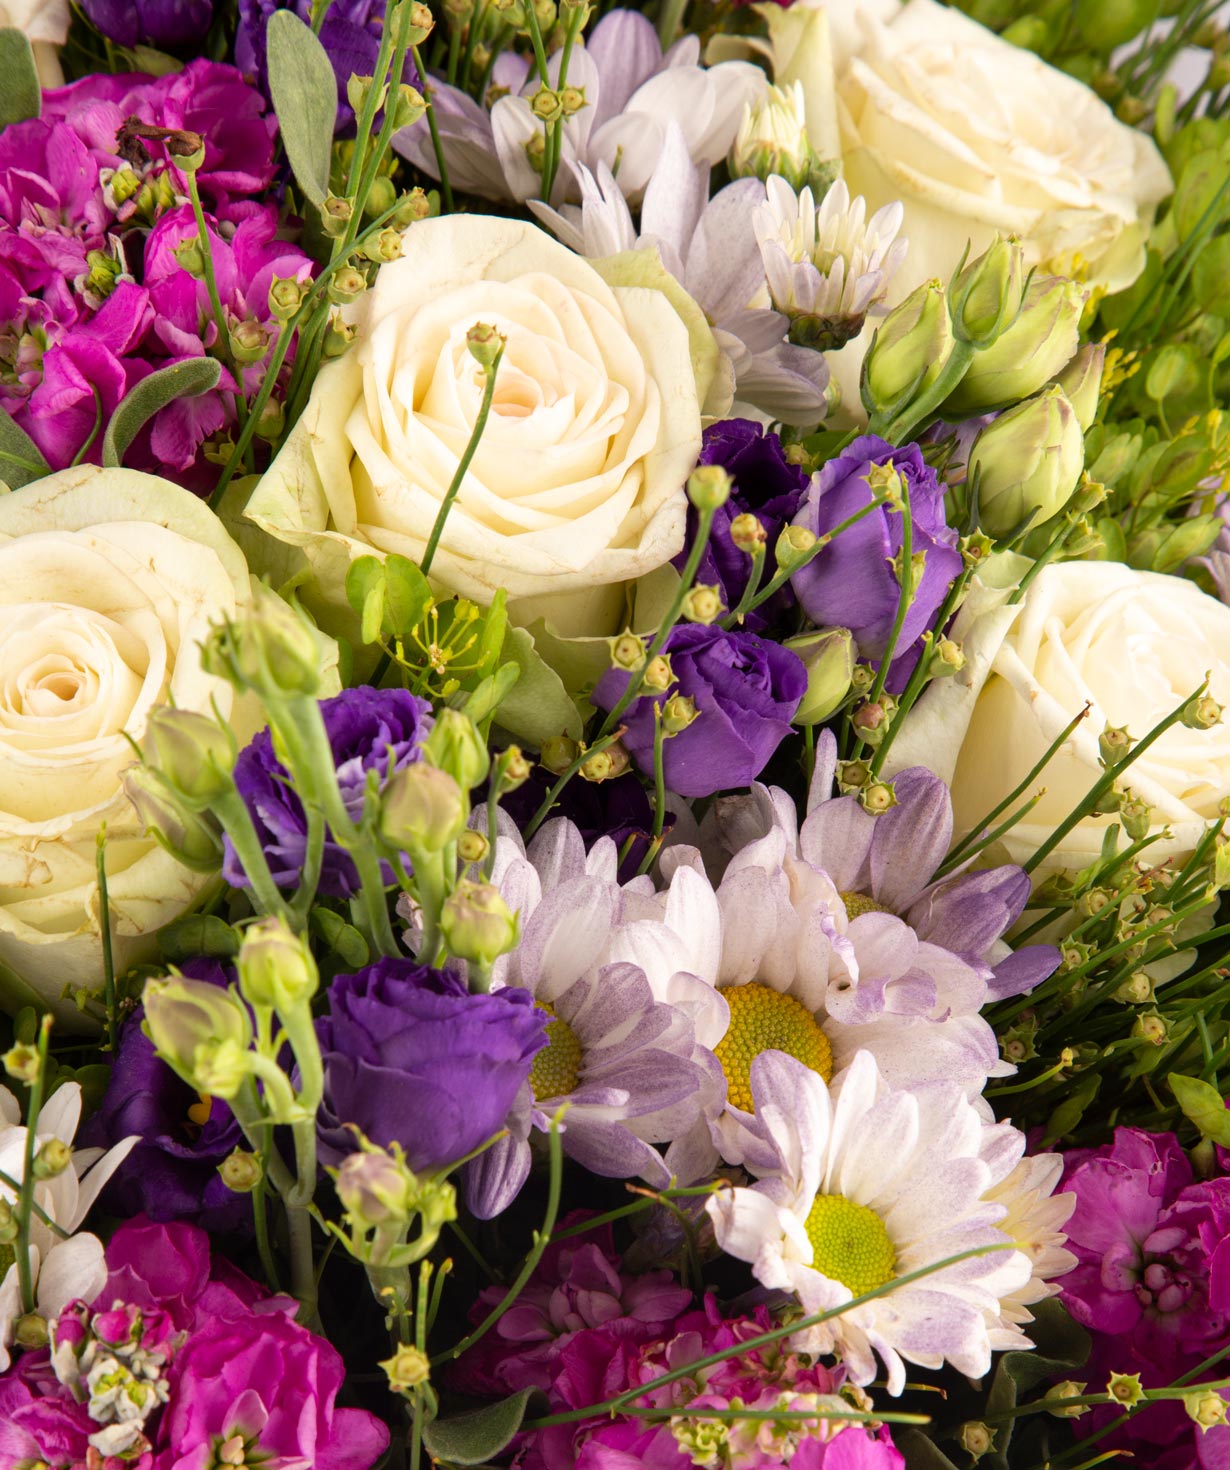 Bouquet ''Zilupe'' with roses and lisianthus